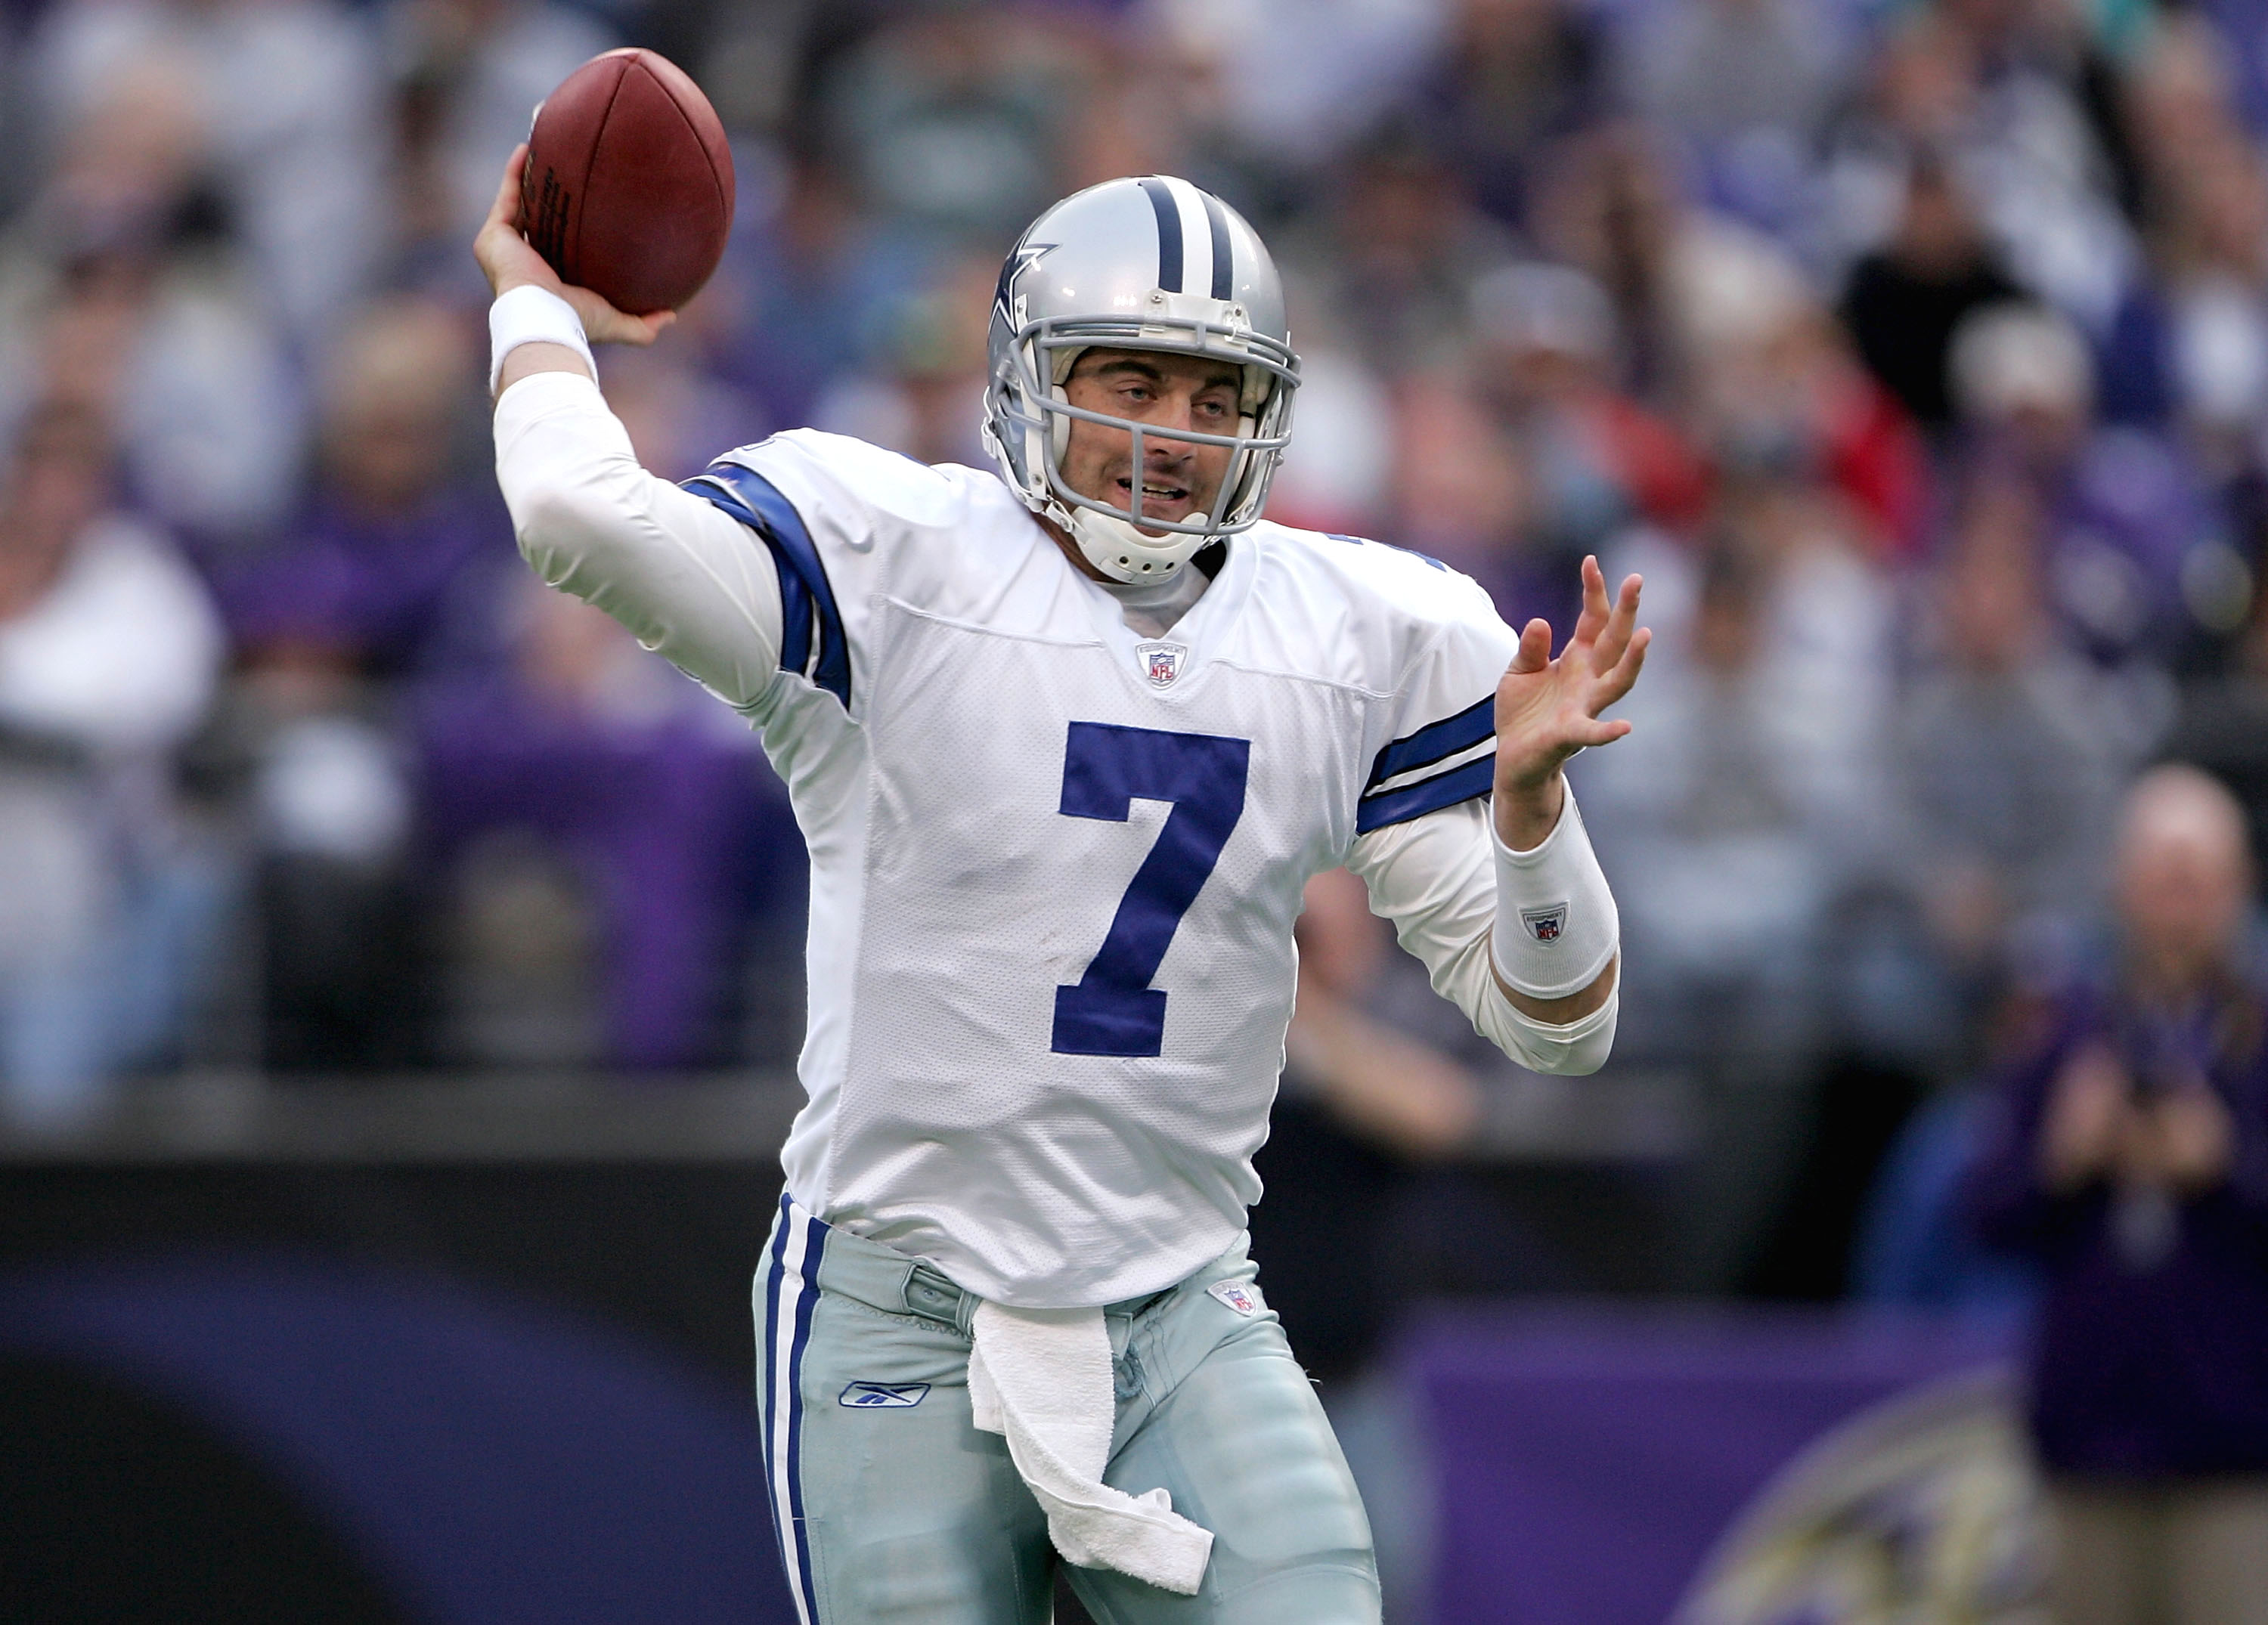 Drew Henson's path to a starting job with the Dallas Cowboys was blocked by Tony Romo. | Doug Pensinger/Getty Images